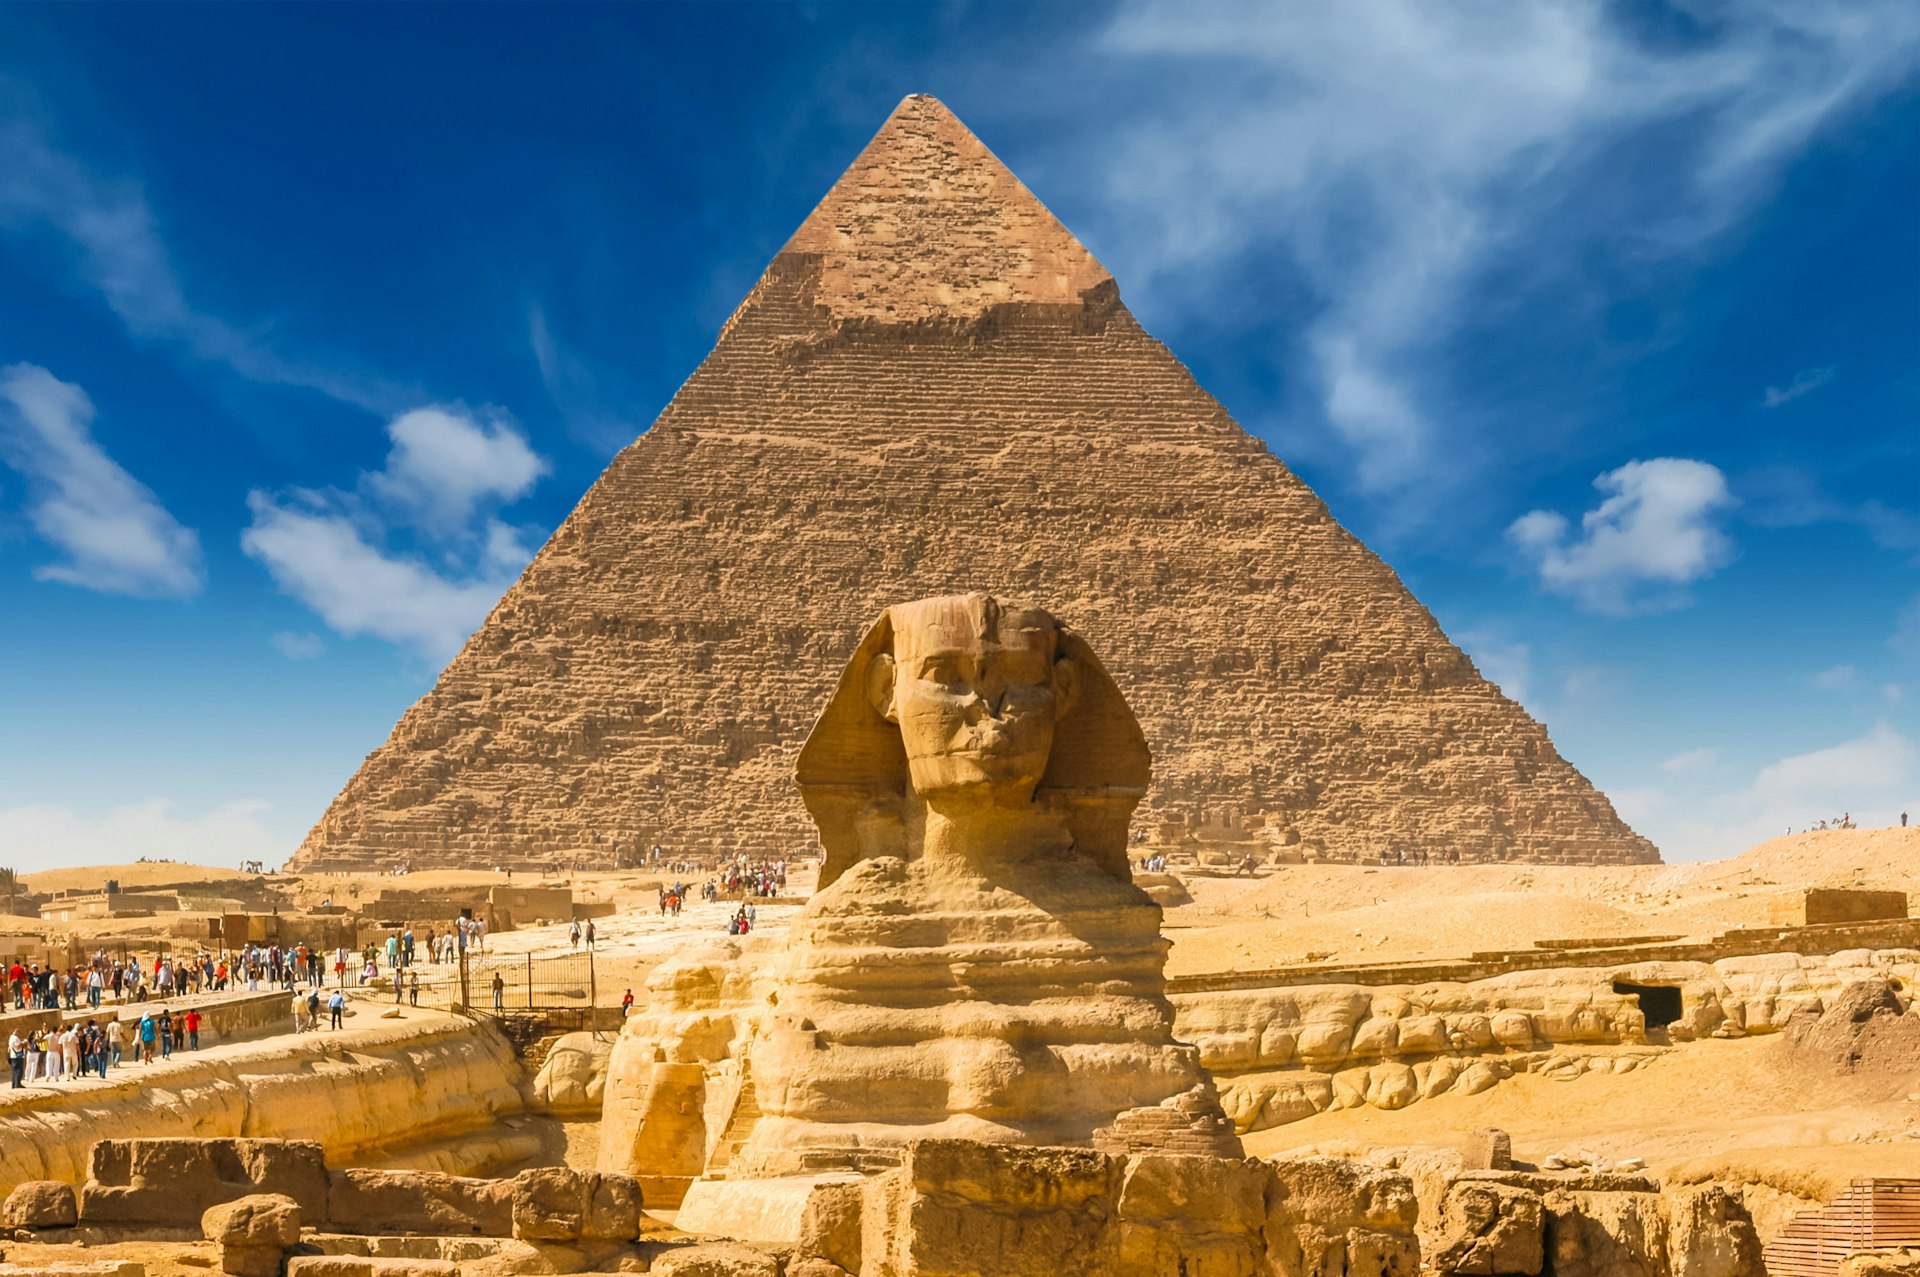 Great Sphinx of Giza with the Great Pyramid of Giza